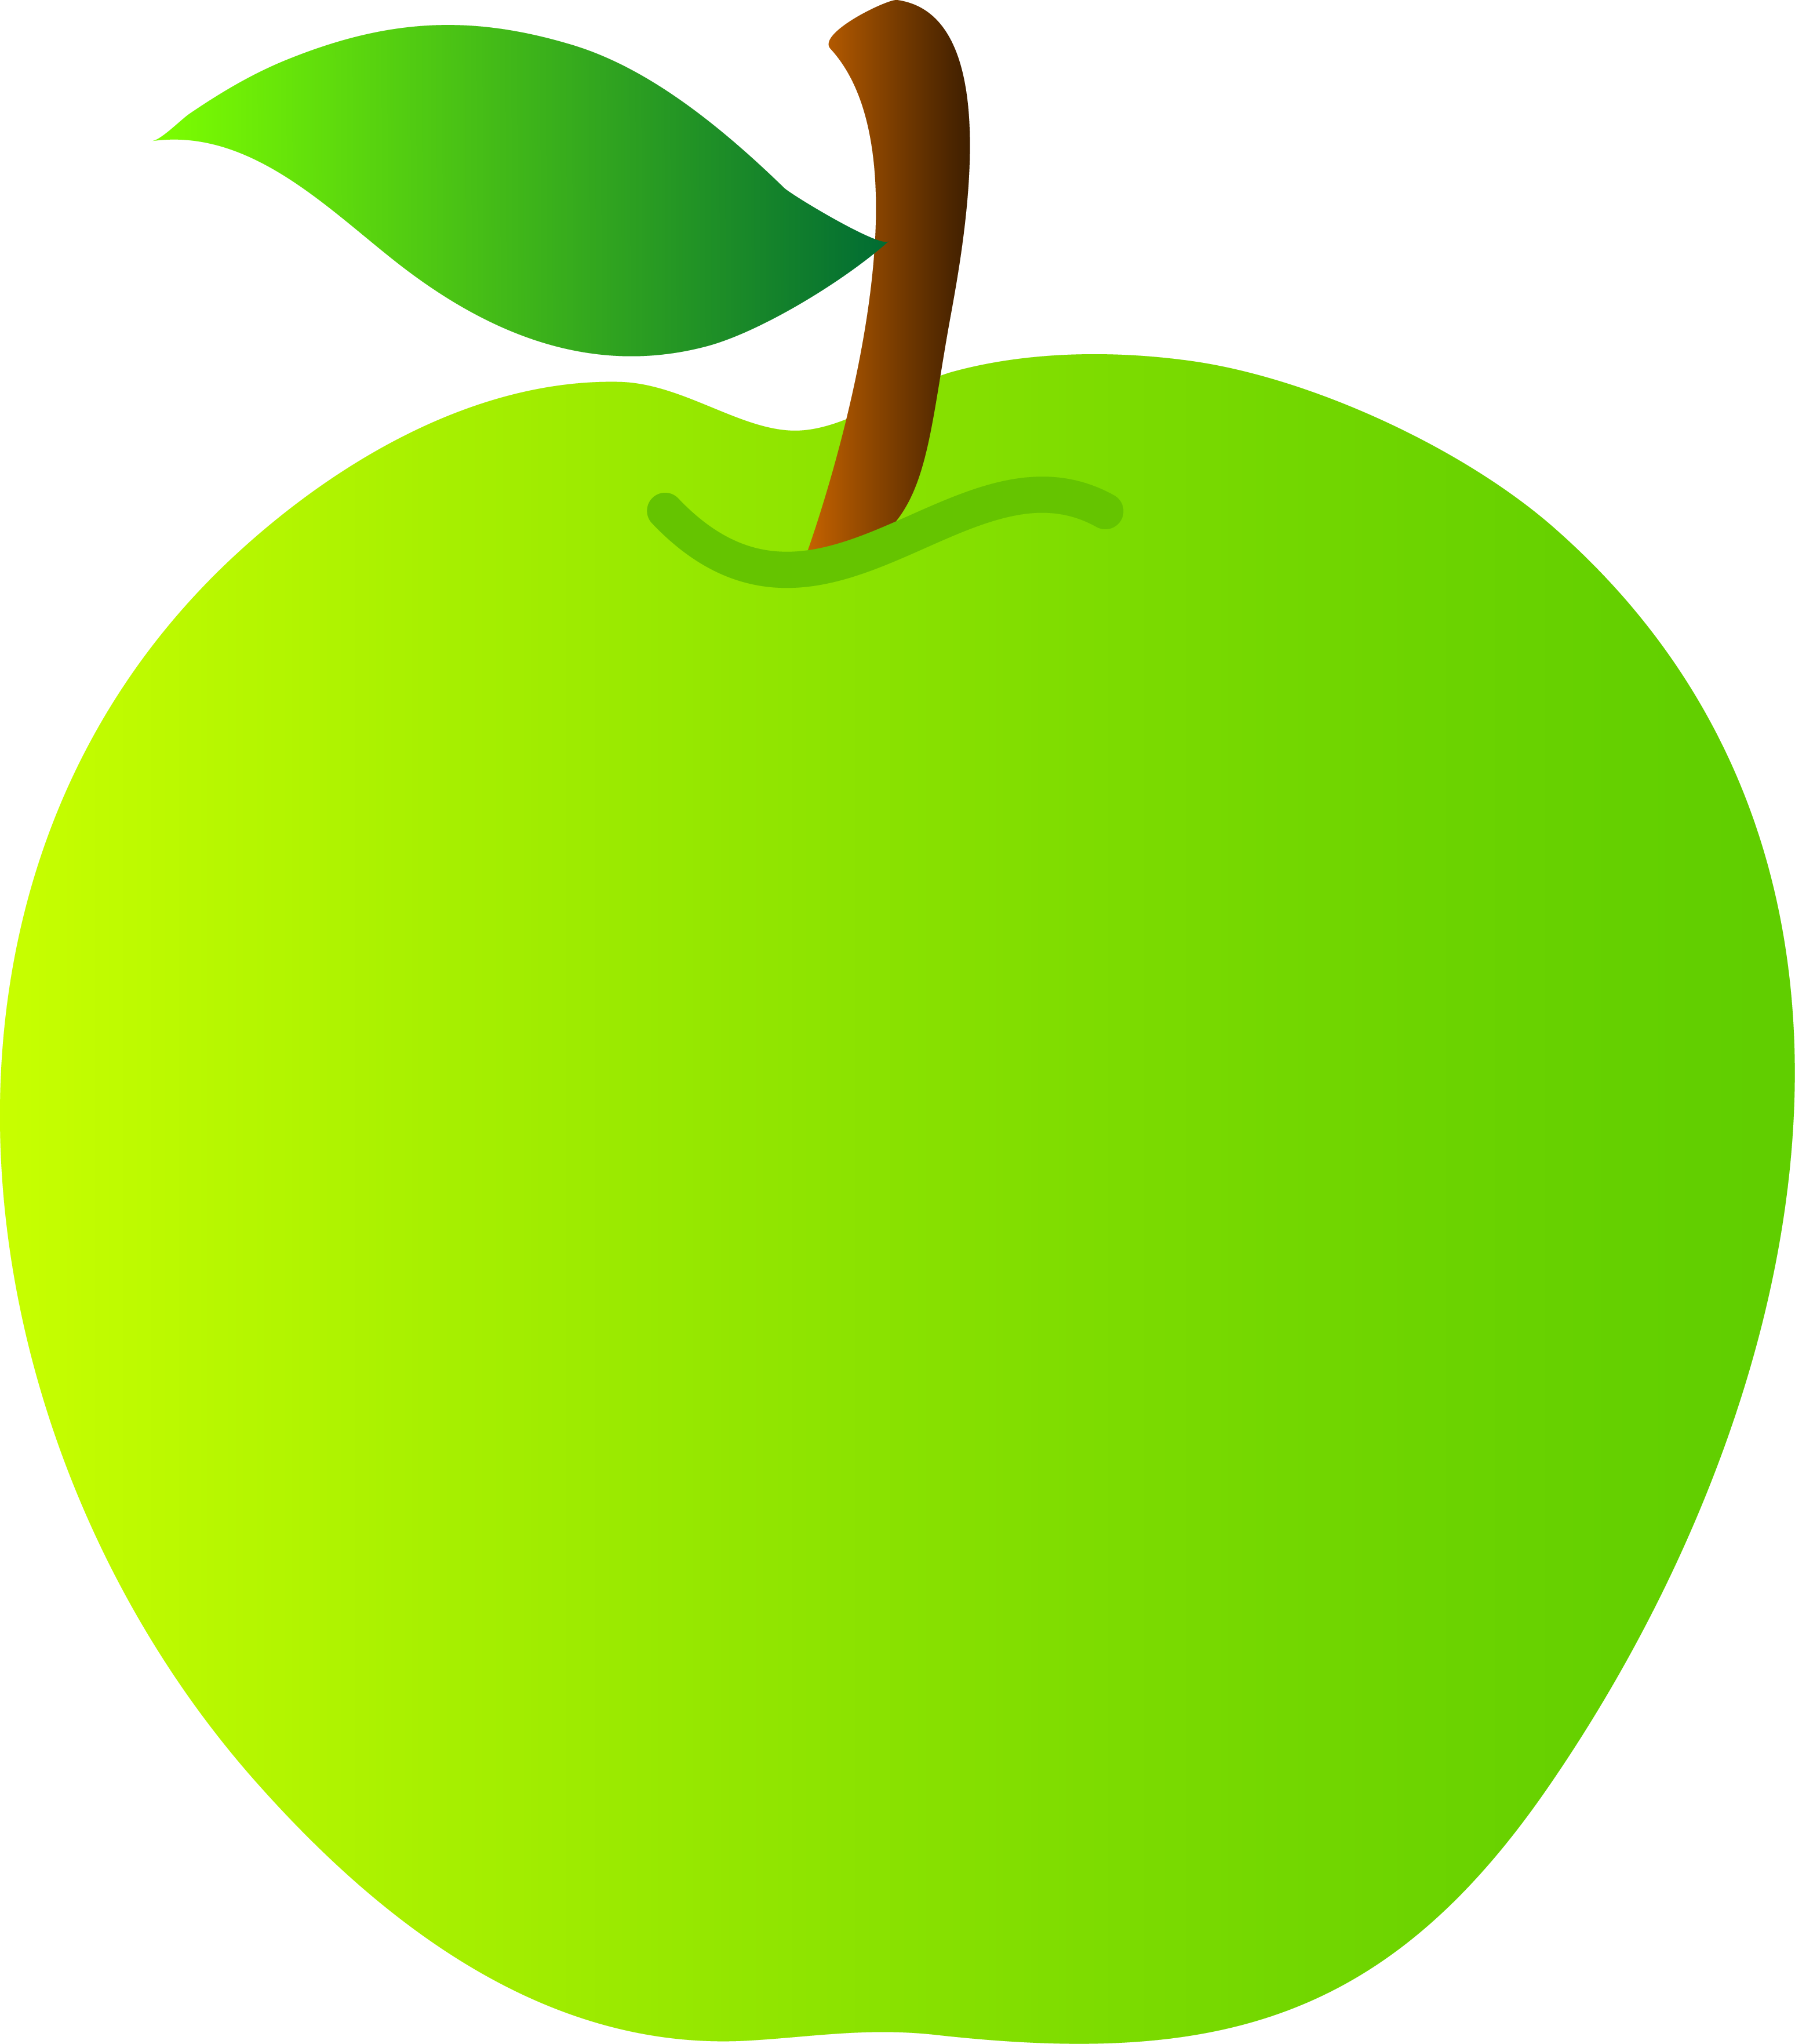 Green Apple Clipart Free Download Clip Art Free Clip Art On 